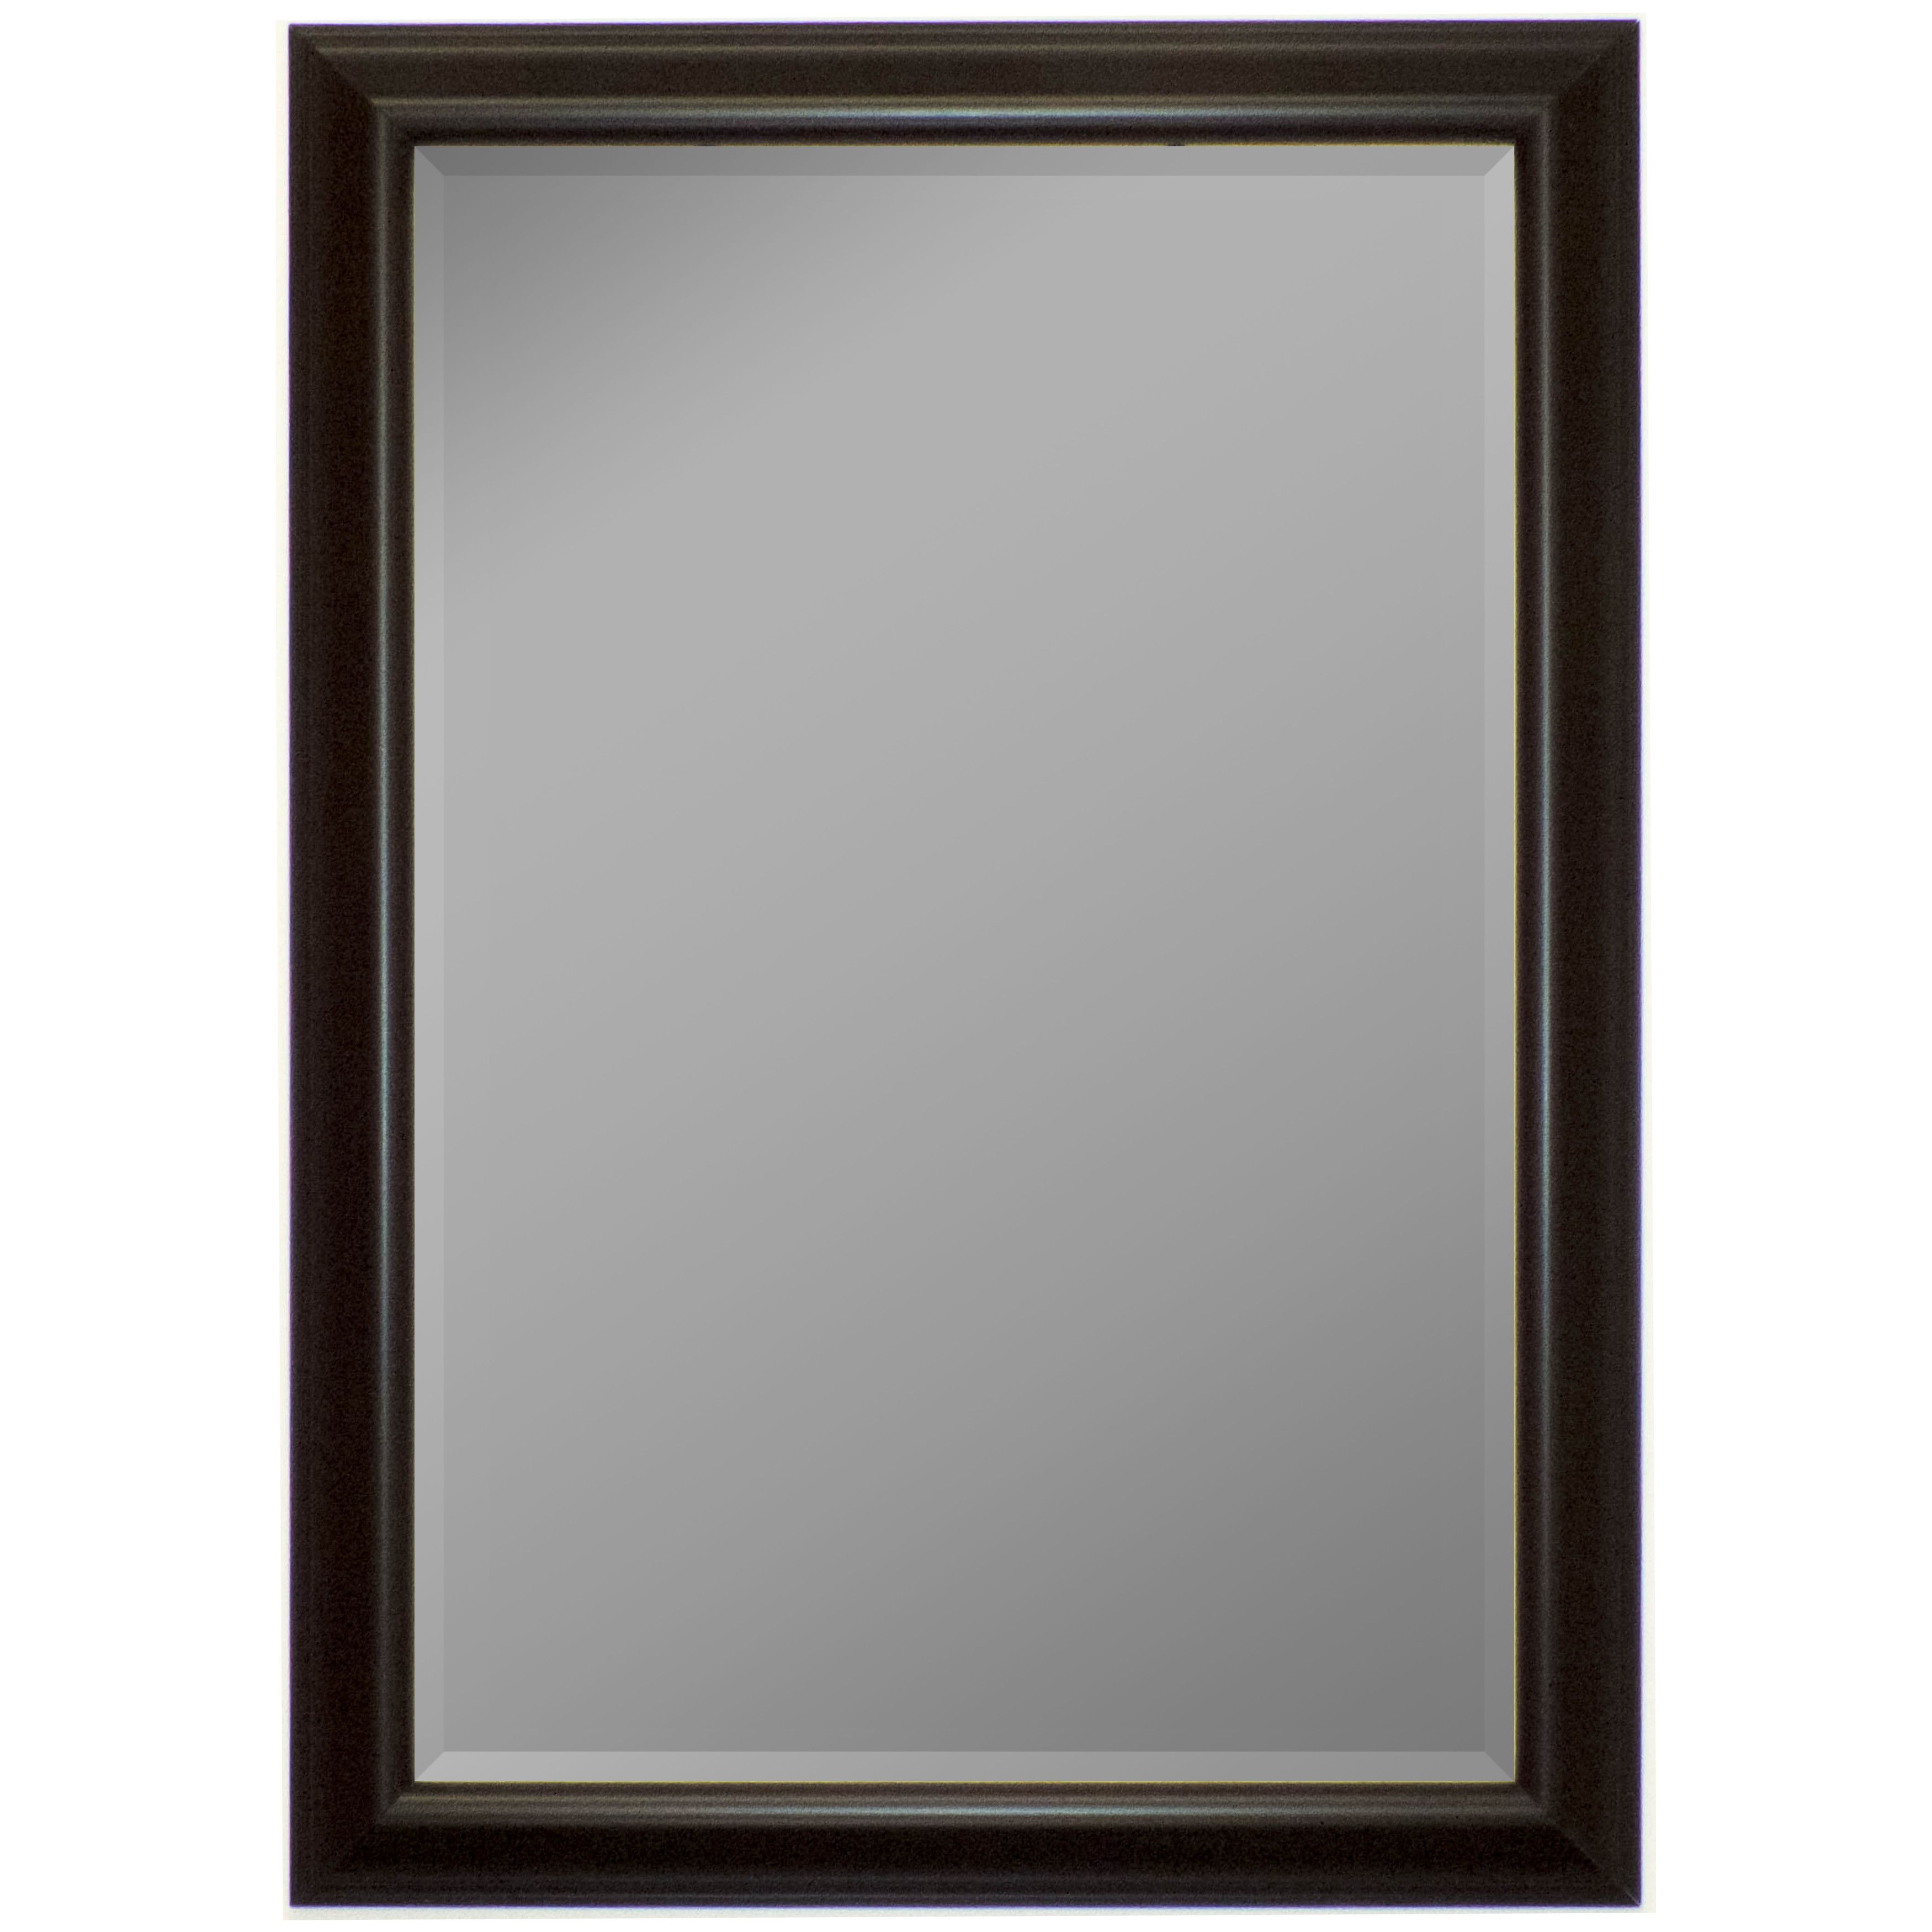 Exquisite Decoration Silver Wall Mirrors Attractive Inspiration With Ornamental Mirrors (View 12 of 15)